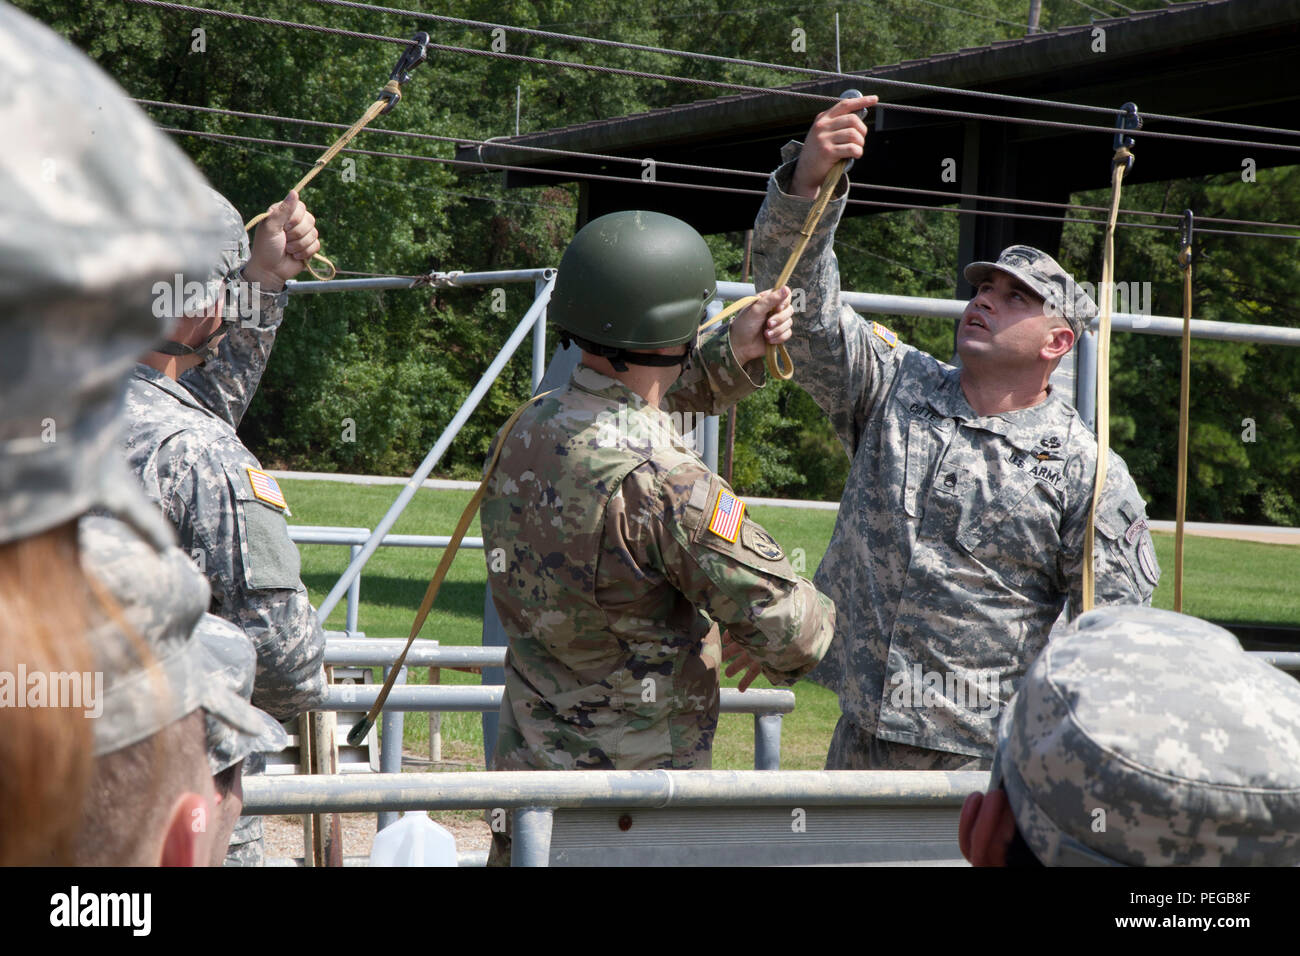 U.S. Army Staff Sgt. Angel Cotte, safety for primary Jumpmaster from Echo Co.1-507th Airborne Infantry Battalion demonstrates  correct  static line hook-up procedures during sustained Airborne training in preparation for the 75th Anniversary Airborne School jump, on Fort Benning, Ga. Aug. 14, 2015. The 1-507th Parachute Infantry Regiment(PIR) Battalion and the 982nd Combat Camera celebrates 75 years of the U.S. Army Airborne School and the commemoration of the last qualifying jump of the first airborne test platoon on Aug. 15, 1940. (U.S. Army photo by Spc. Charles M. Willingham/ Released) Stock Photo